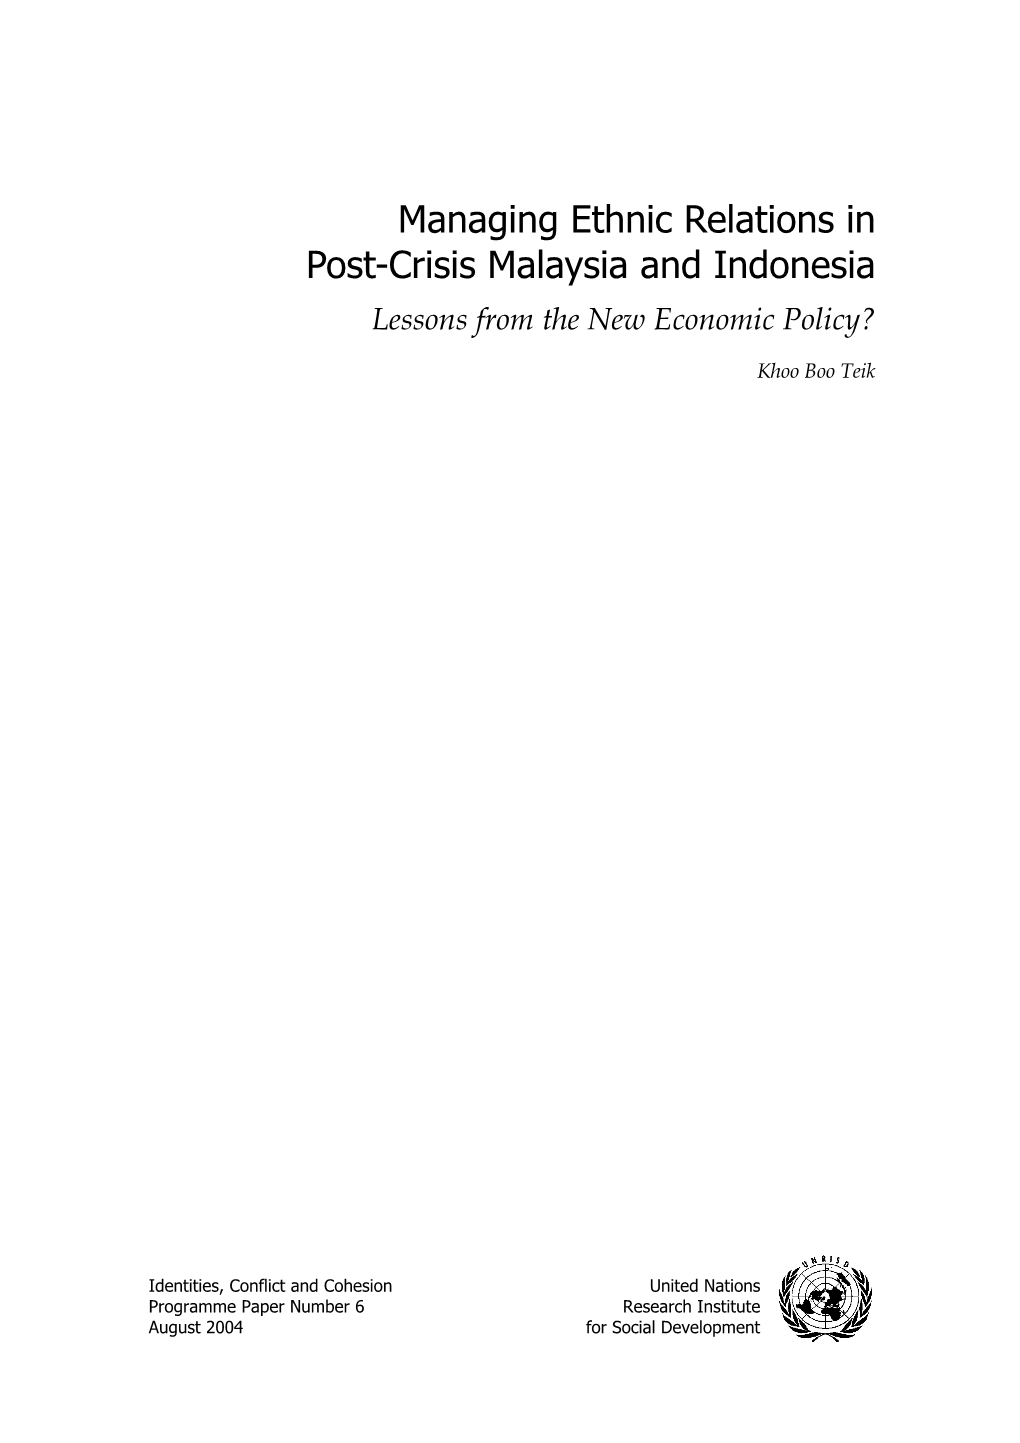 Managing Ethnic Relations in Post-Crisis Malaysia and Indonesia Lessons from the New Economic Policy?